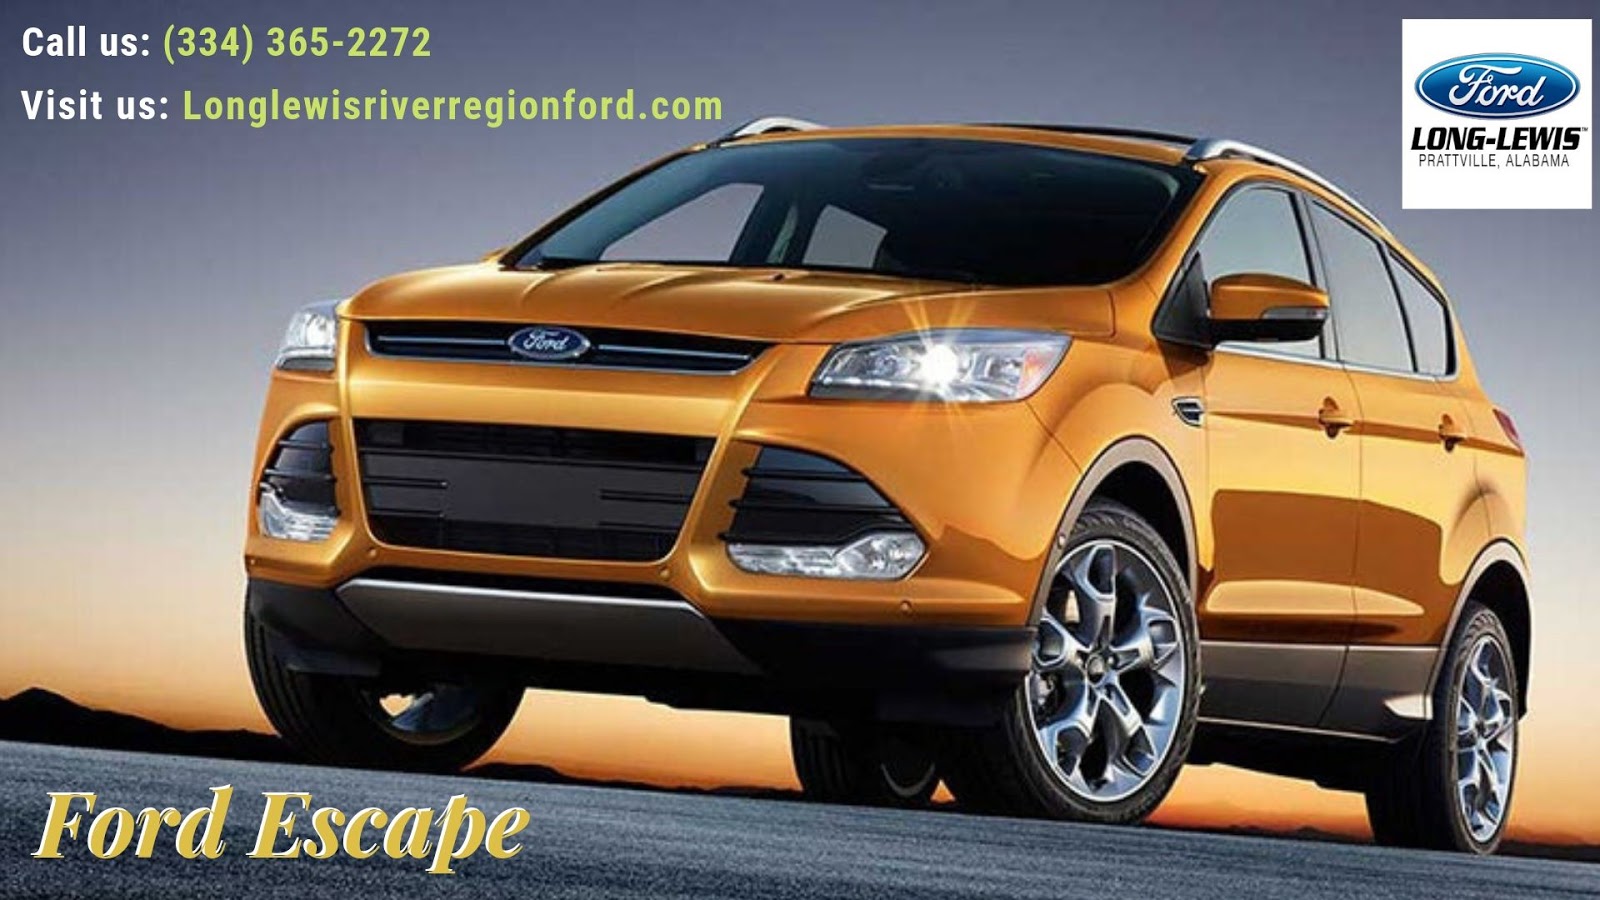 Start Your Travel With Our Ford Escape ~ Welcome to LONG-LEWIS™ est. 1911!